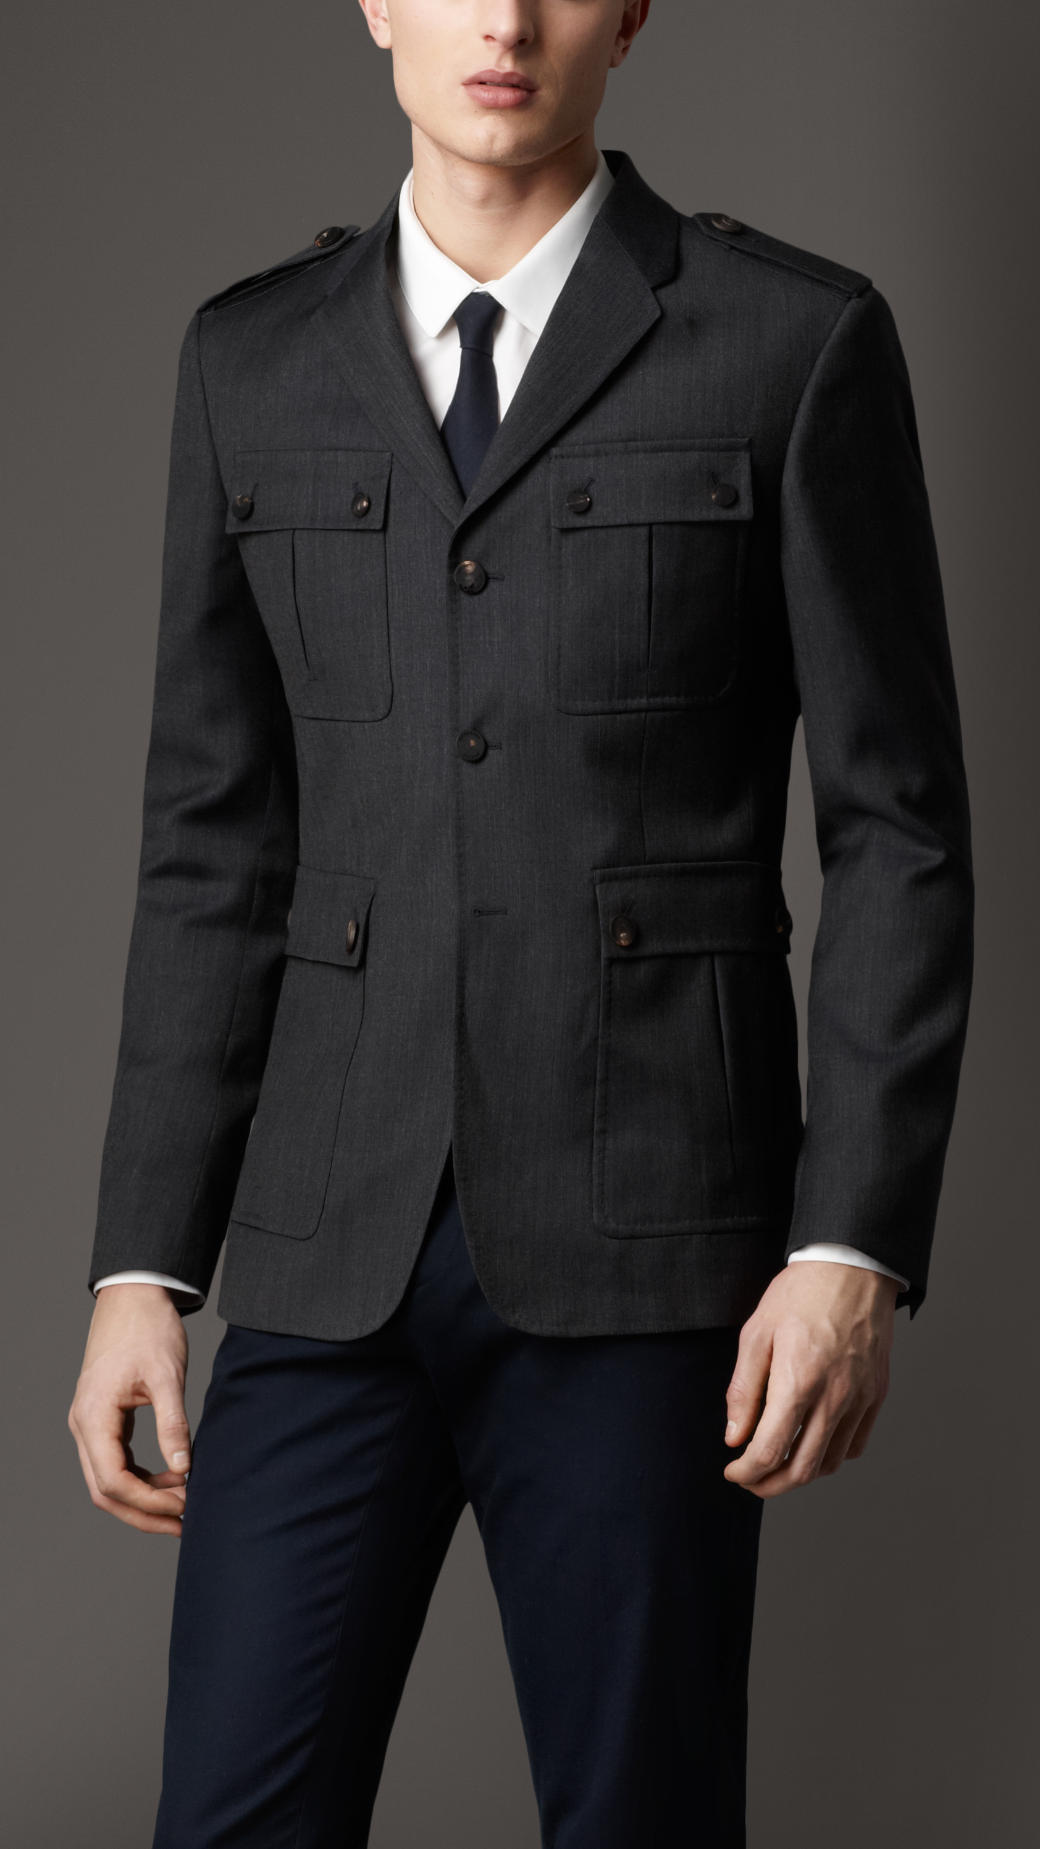 Lyst - Burberry Modern Fit Wool Military Jacket in Gray for Men